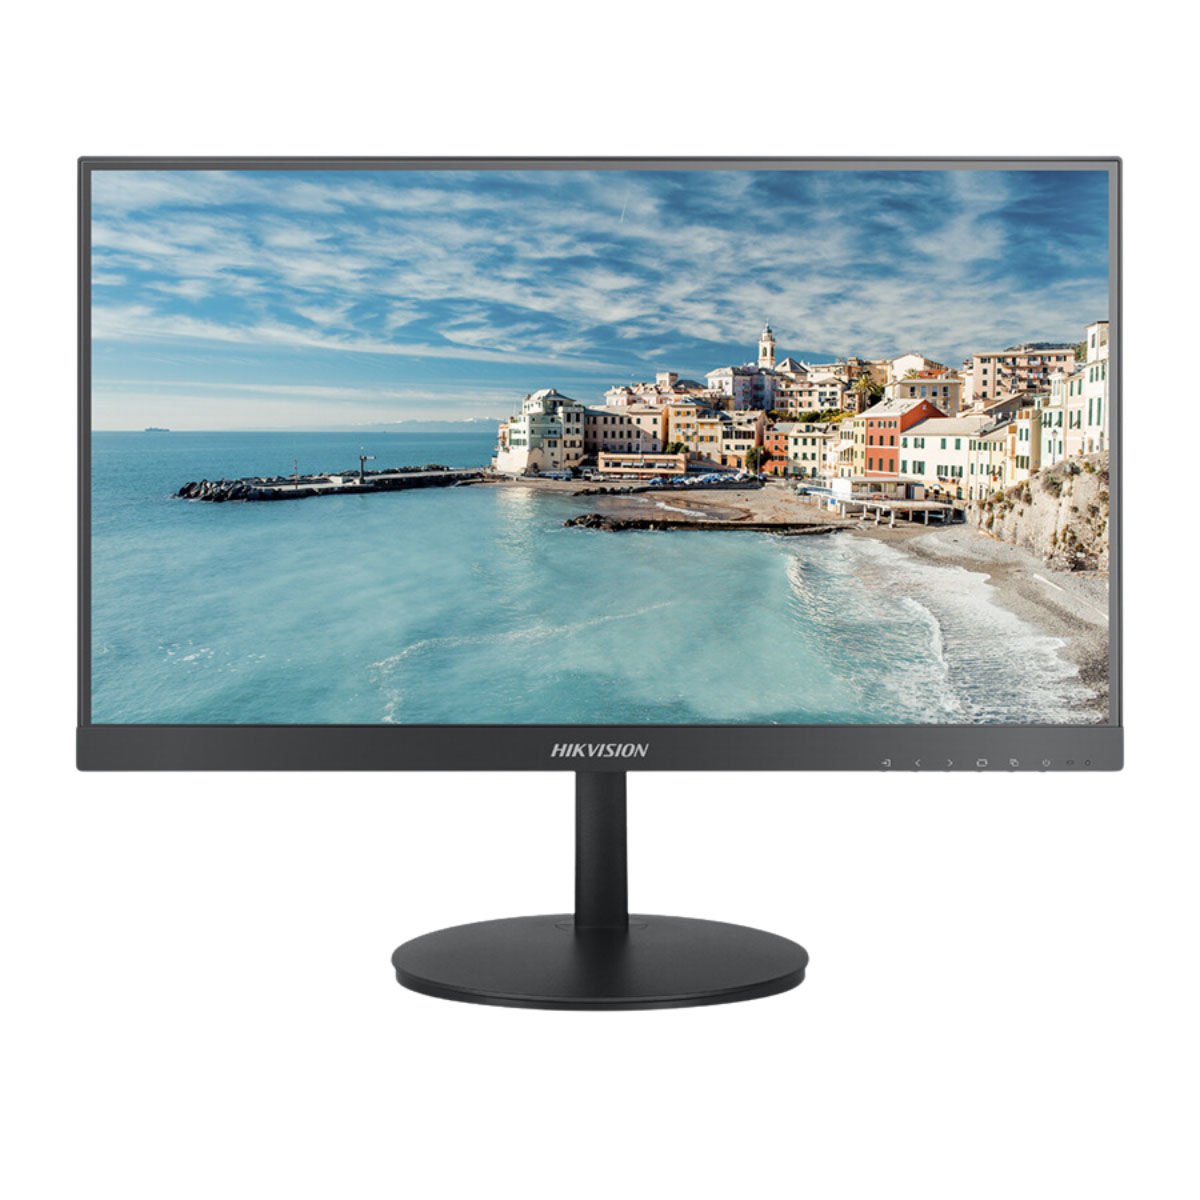 Hikvision DS-D5022FN-C 21.5'' Full HD Monitor